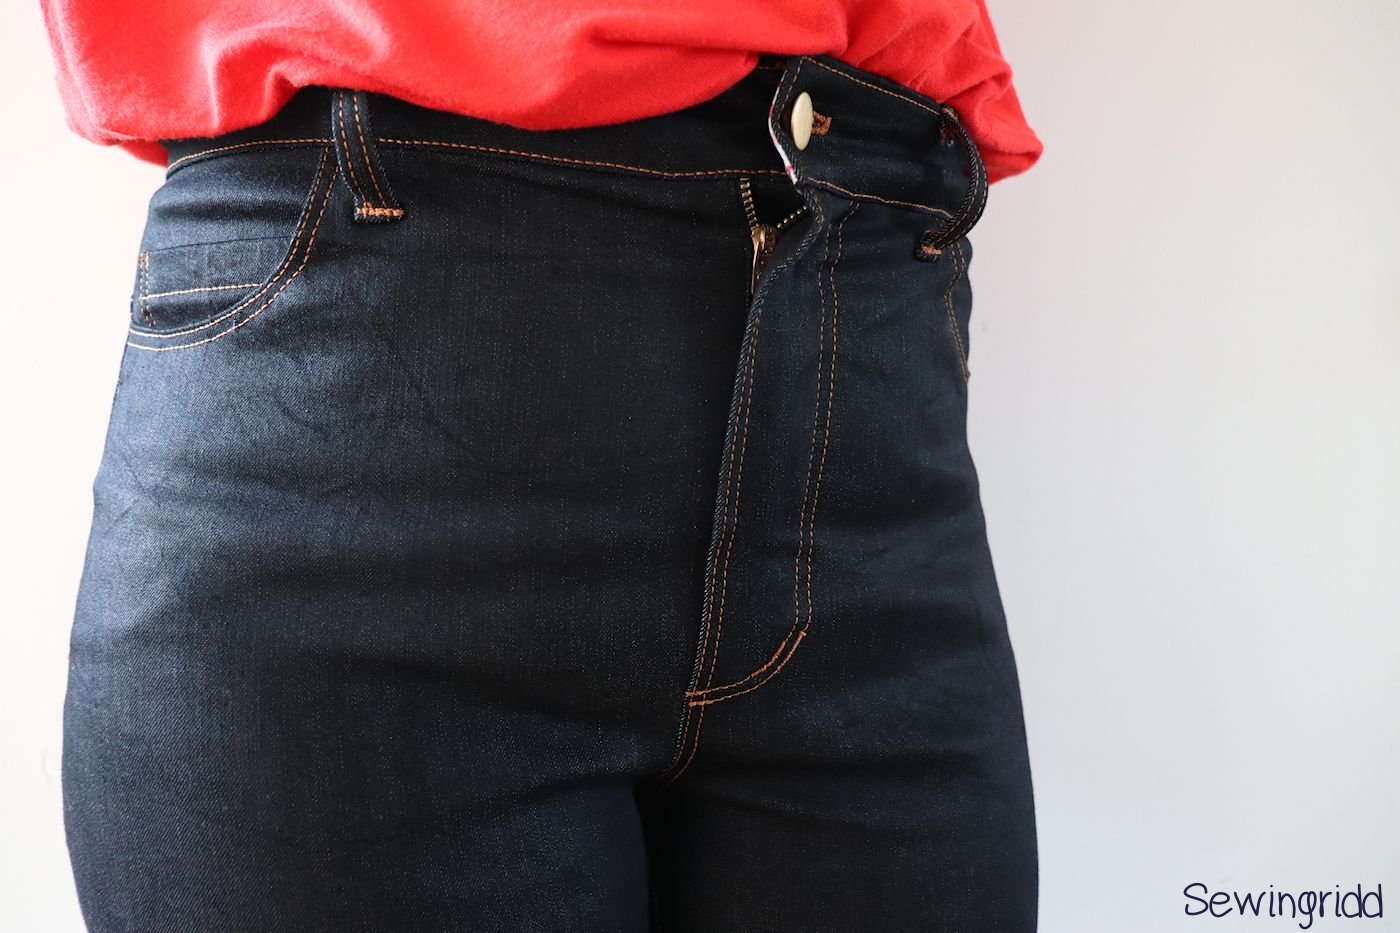 High waisted Ginger Jeans sewn by Sewingridd